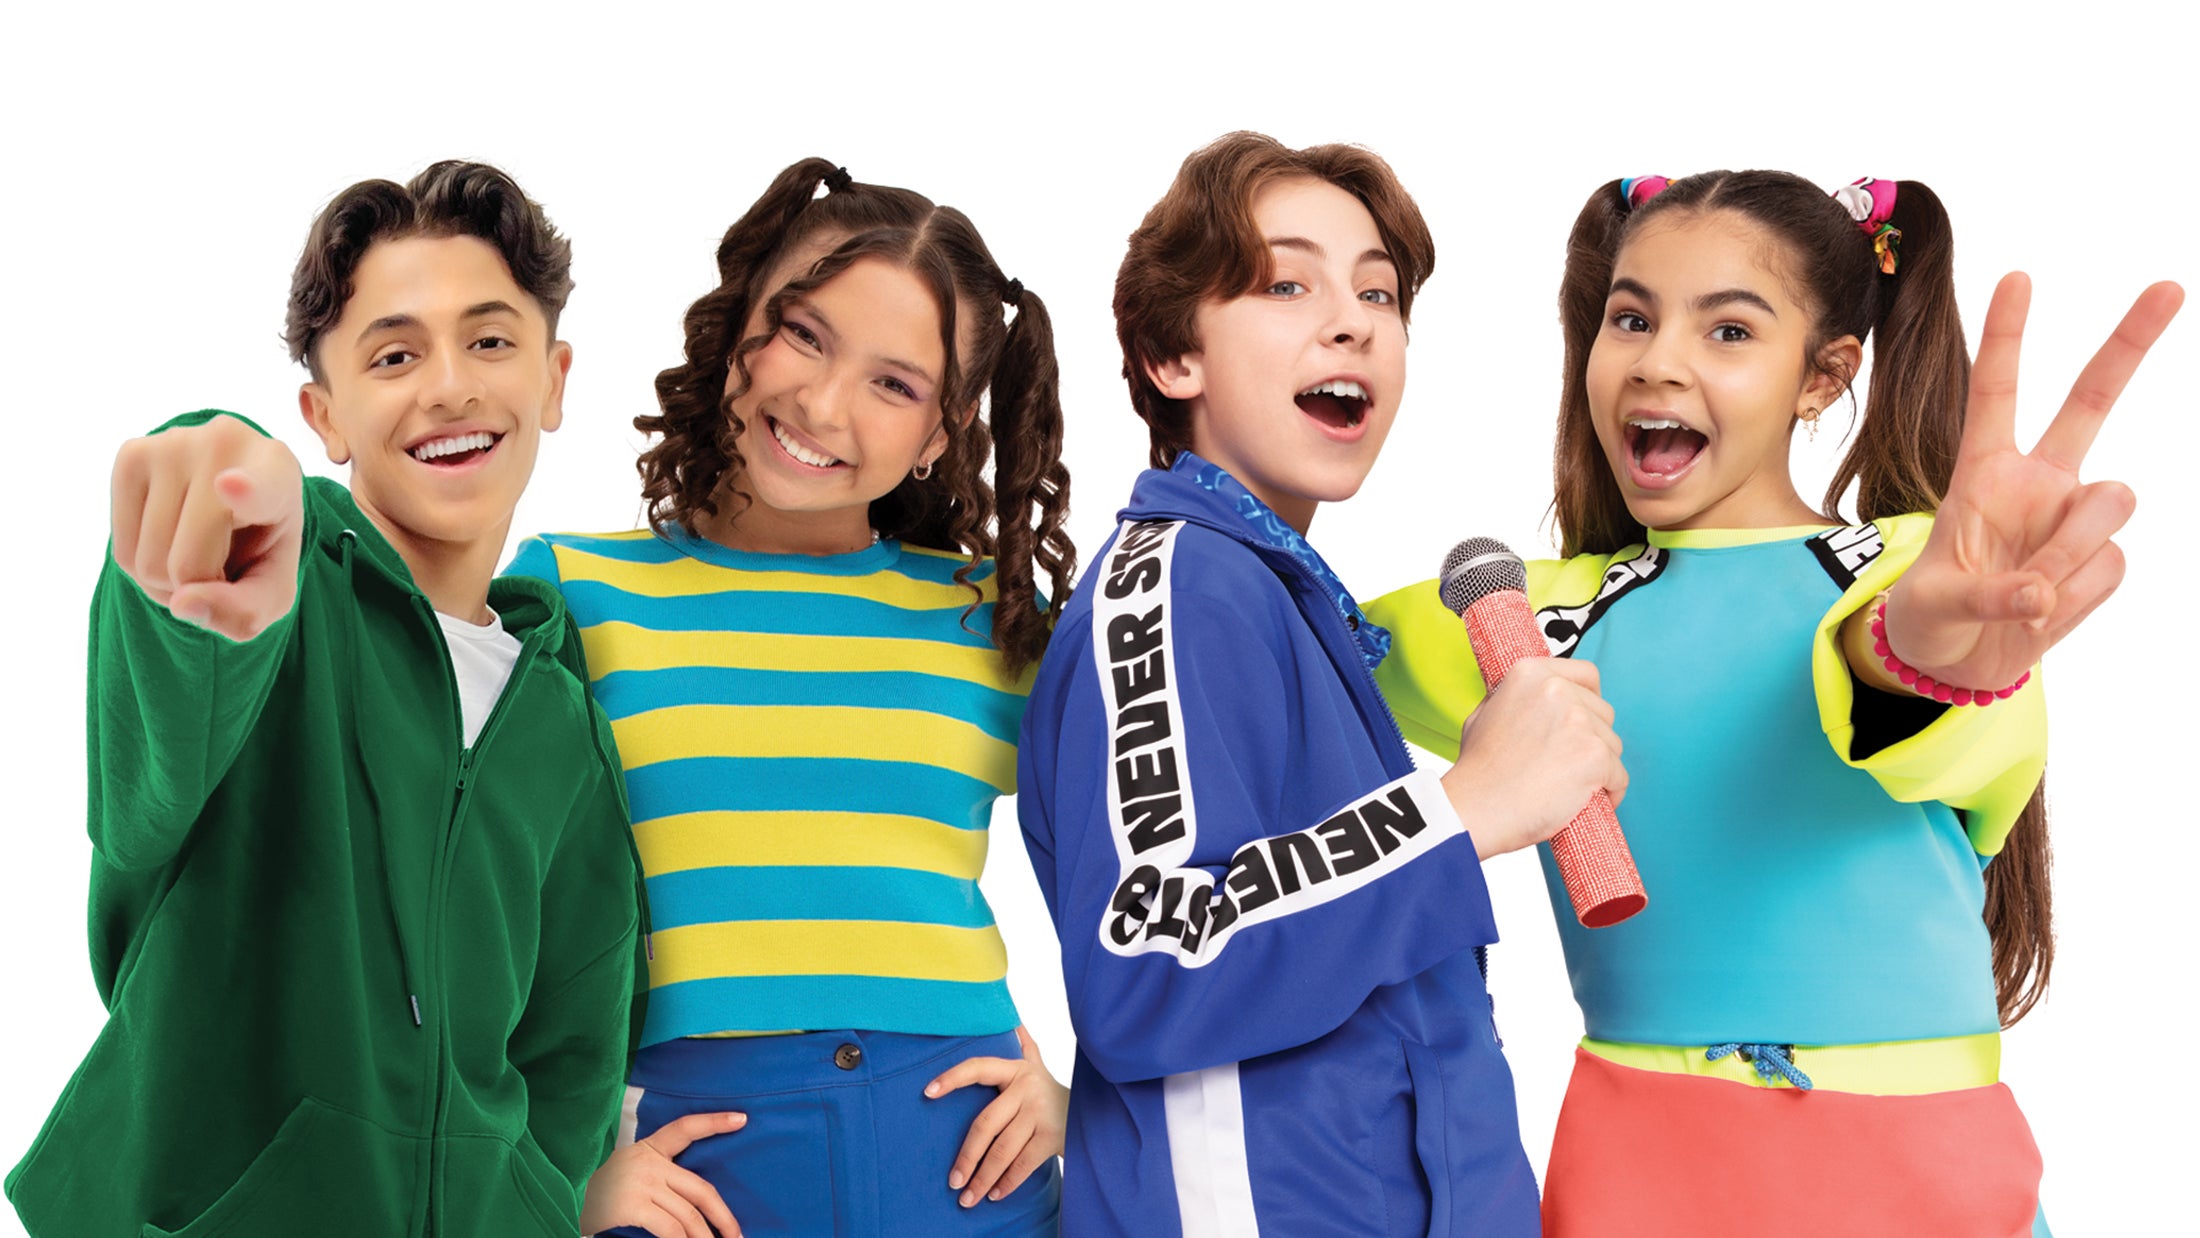 KIDZ BOP Never Stop Live Tour in Moon Township promo photo for VIP Package Onsale presale offer code